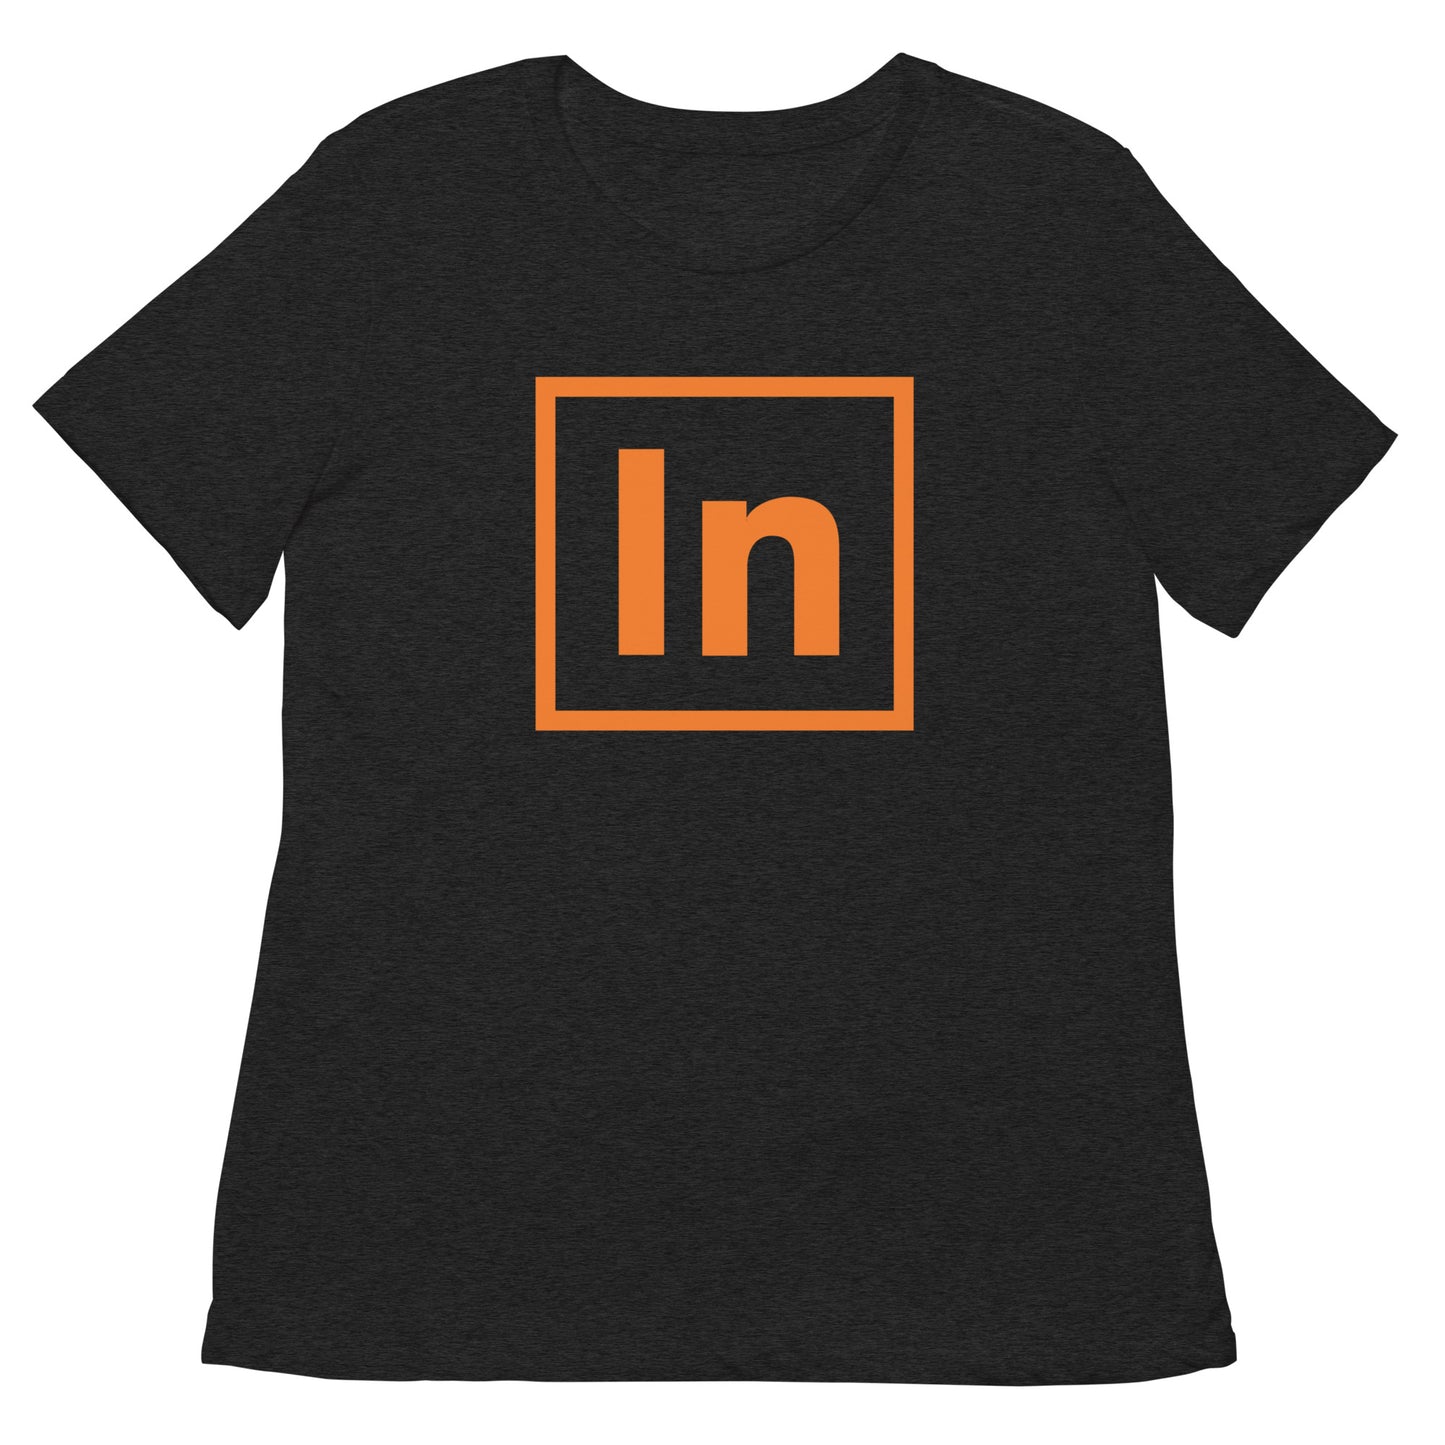 Women’s Extra-soft Tri-blend T-shirt - "In"